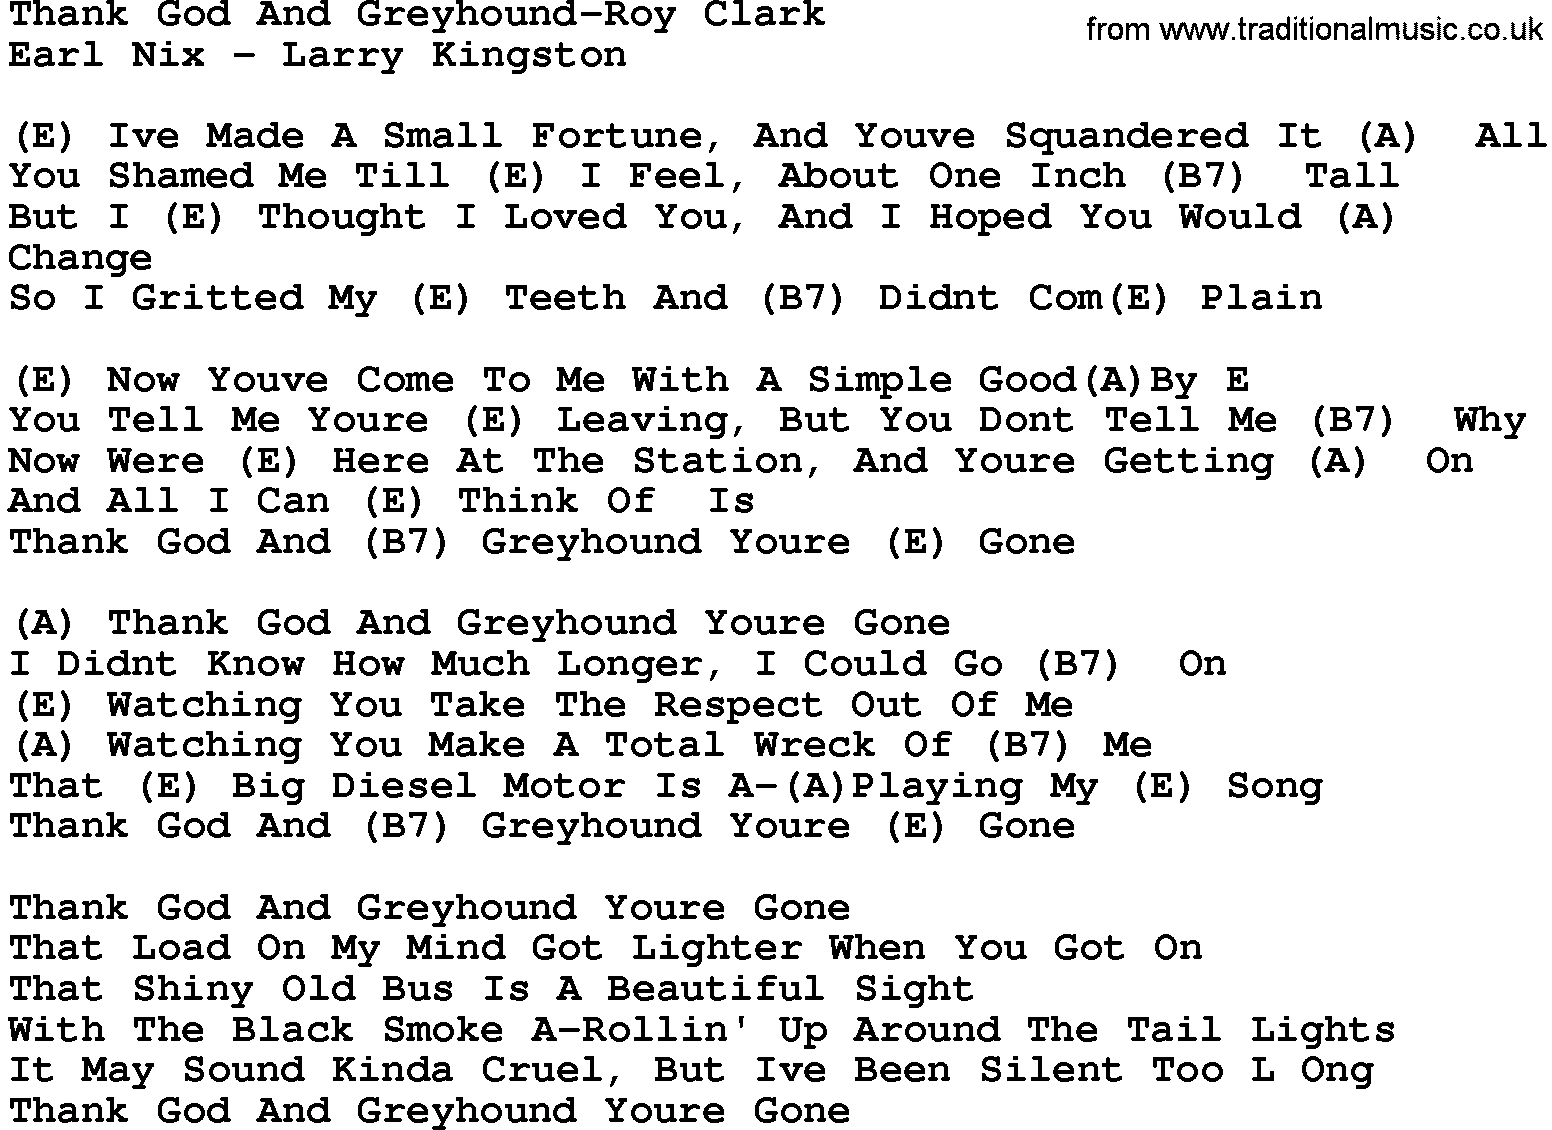 Country music song: Thank God And Greyhound-Roy Clark lyrics and chords